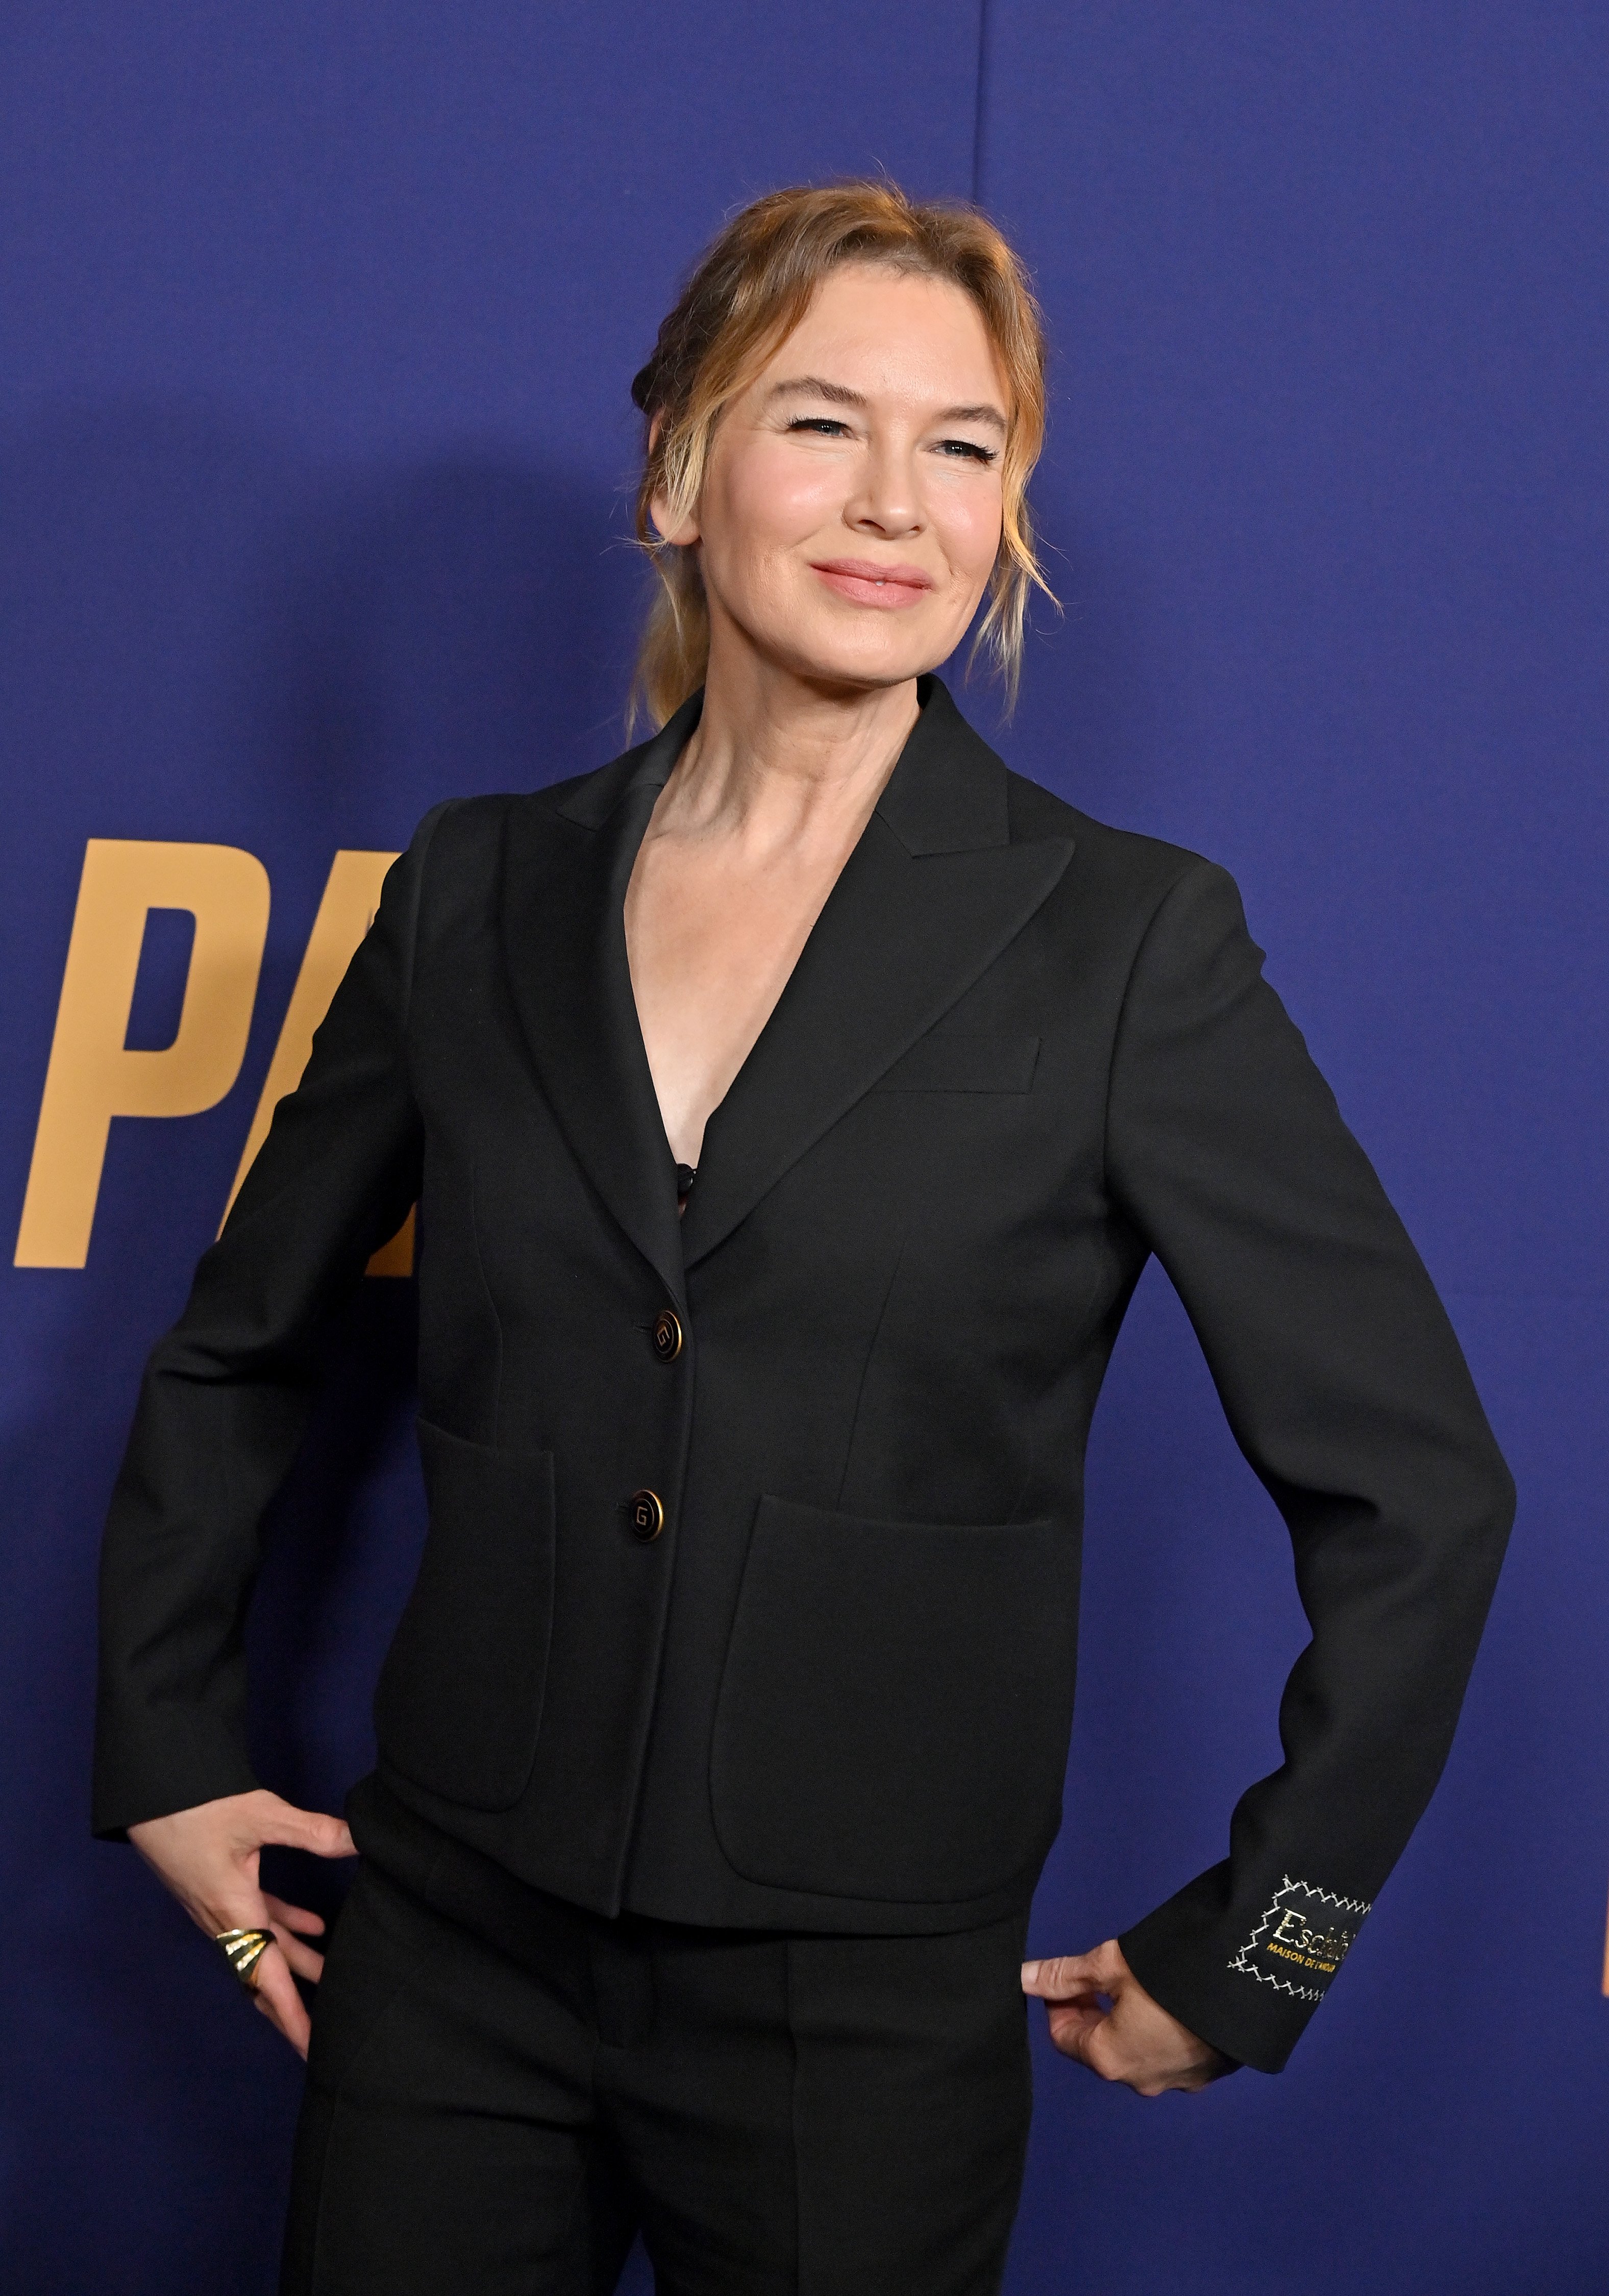 Renée Zellweger attends NBCUniversal's FYC Event for "The Thing About Pam" in California on May 18, 2022 | Source: Getty Images 